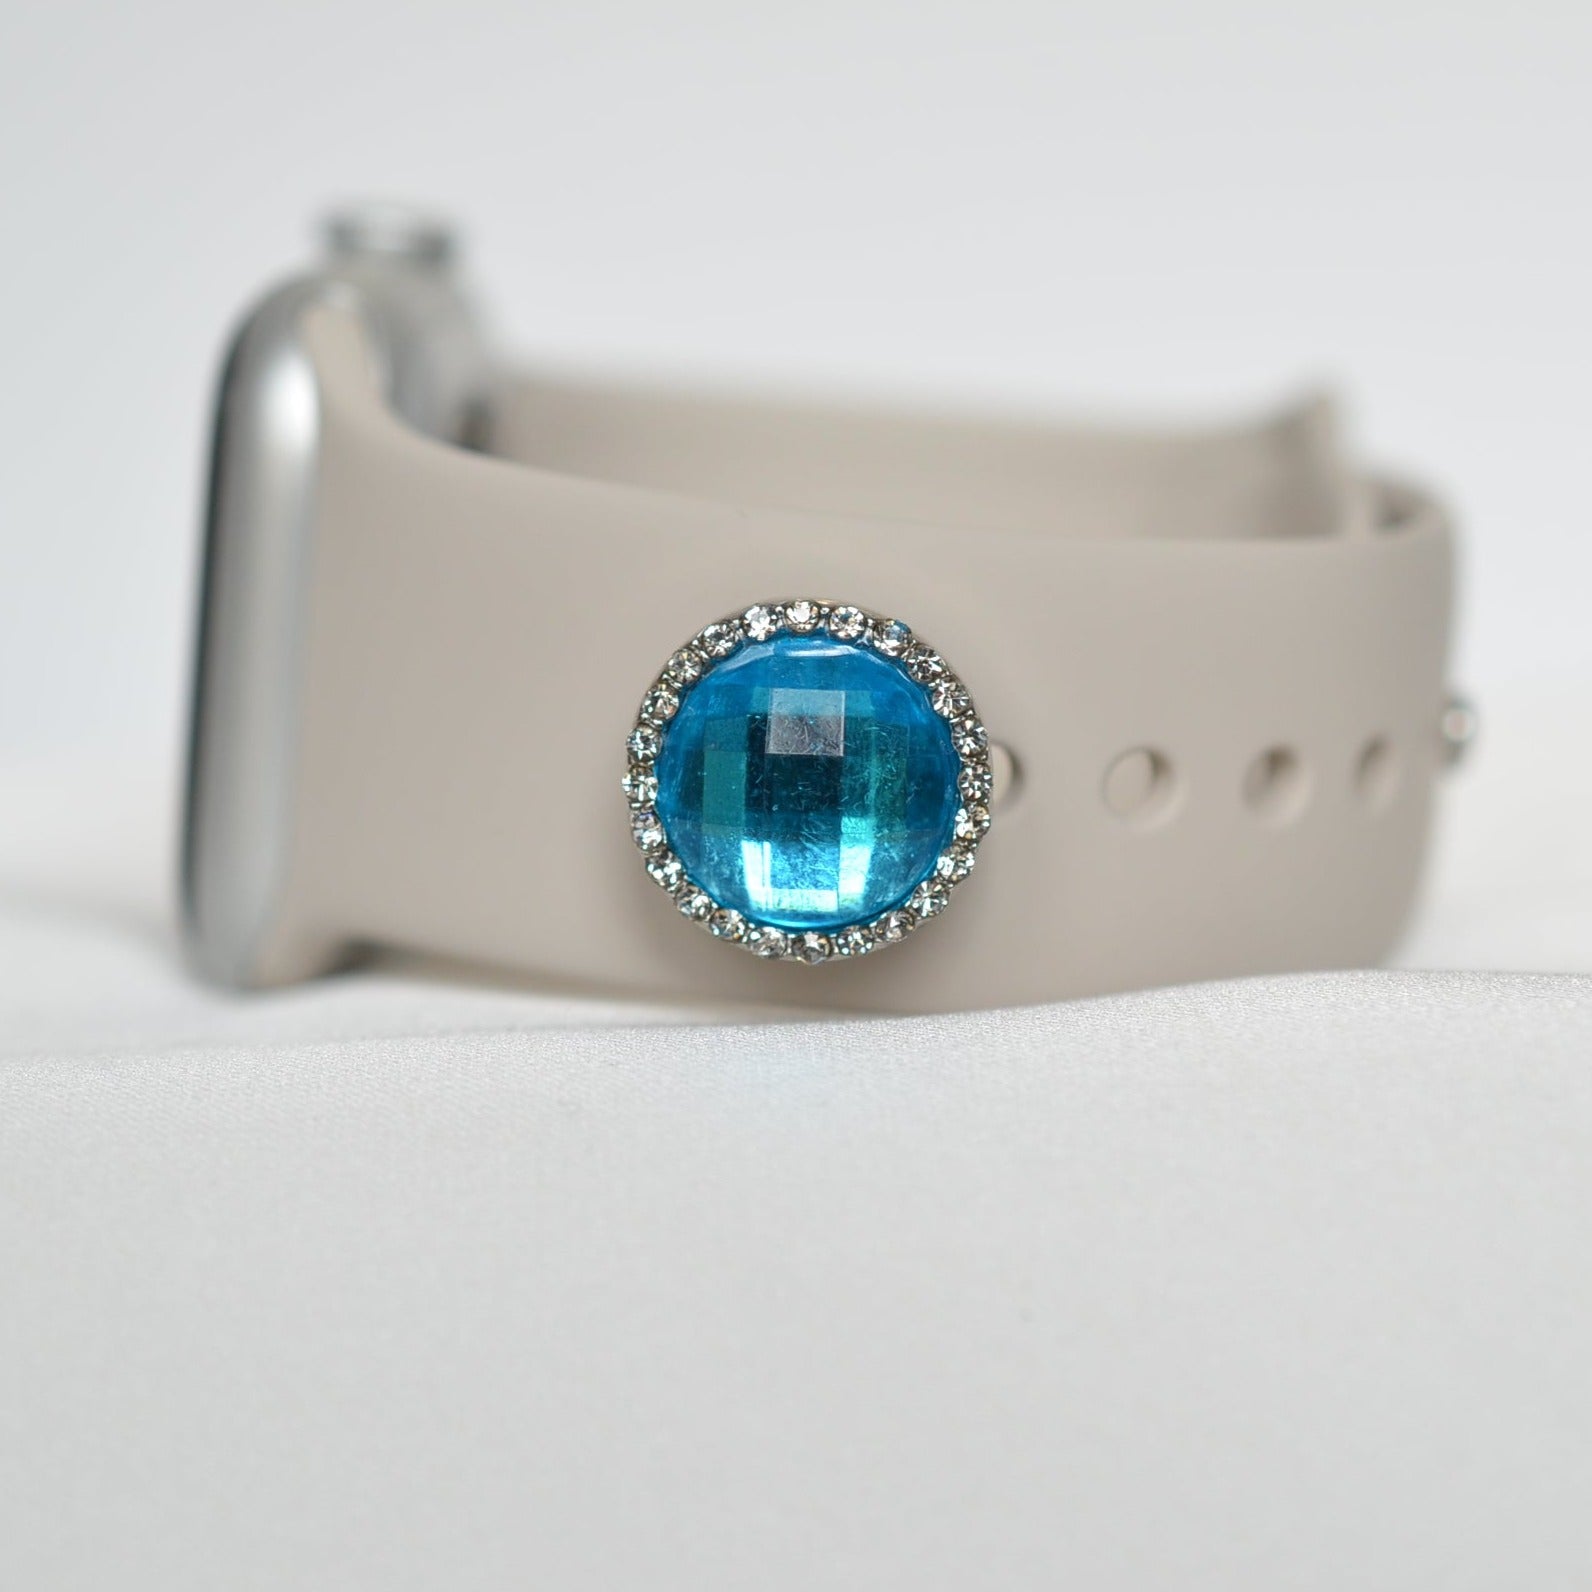 Large Blue Charm for Belt, Bag and Watch Bands